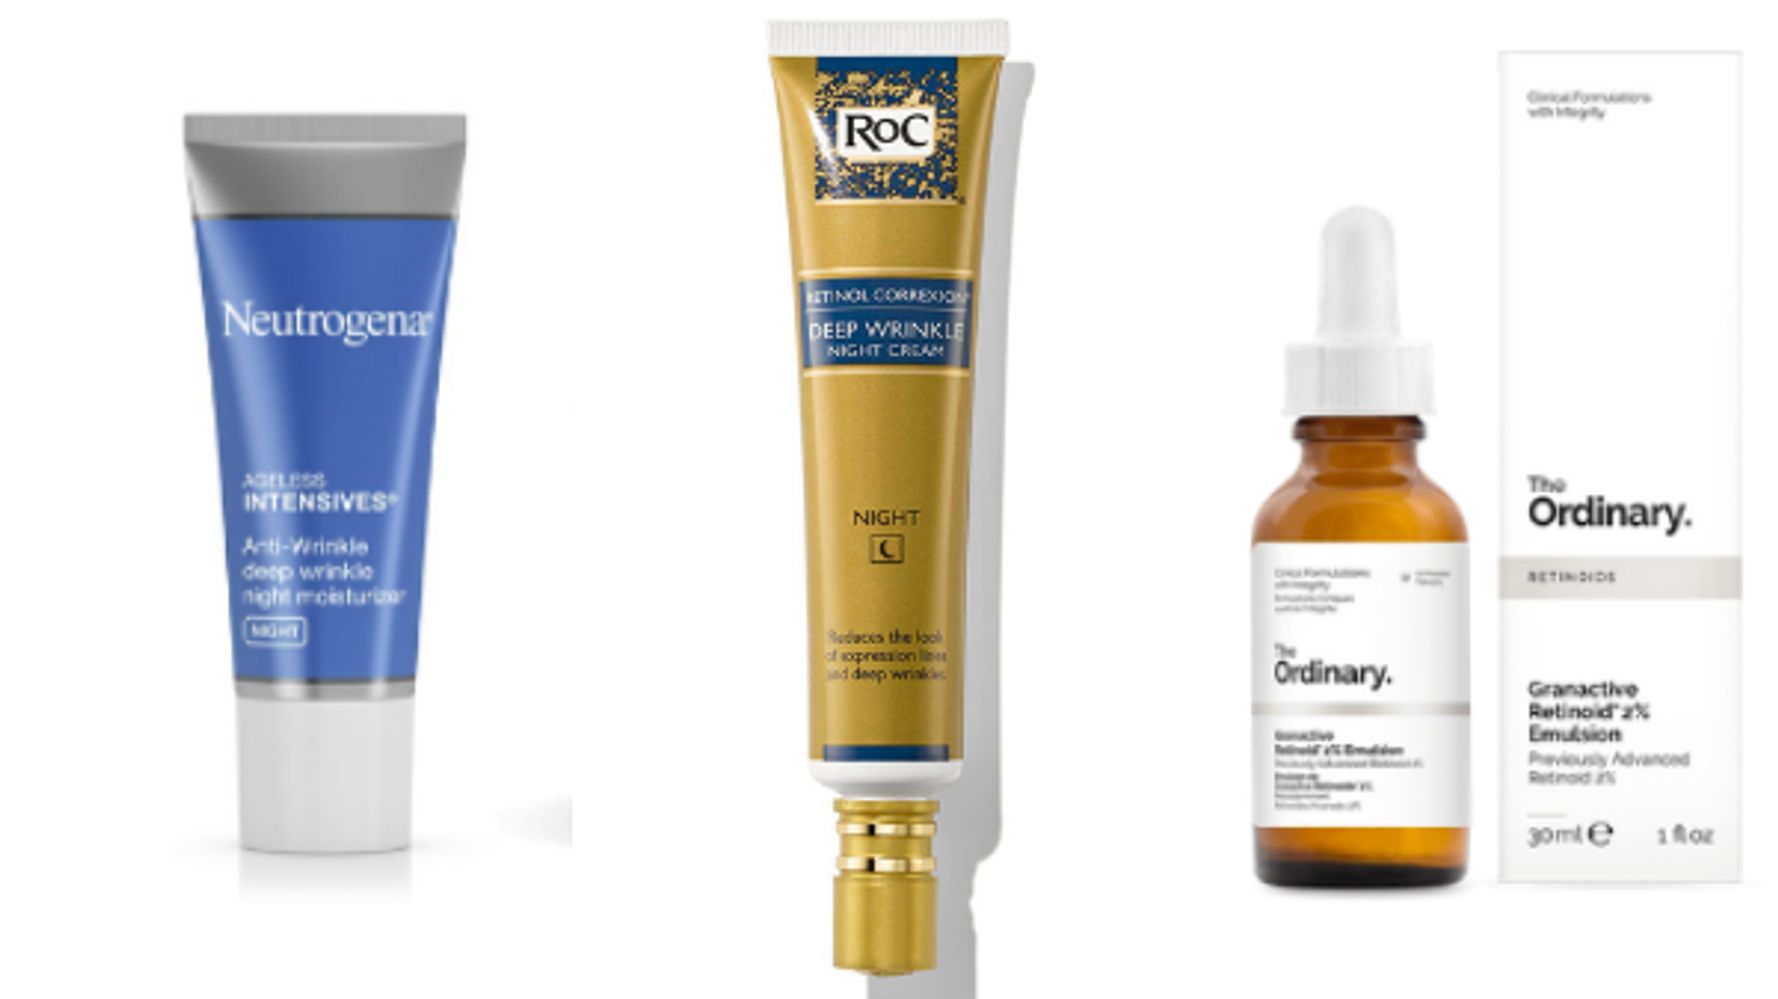 The Best Retinol Products Dermatologists Highly Recommend | Life